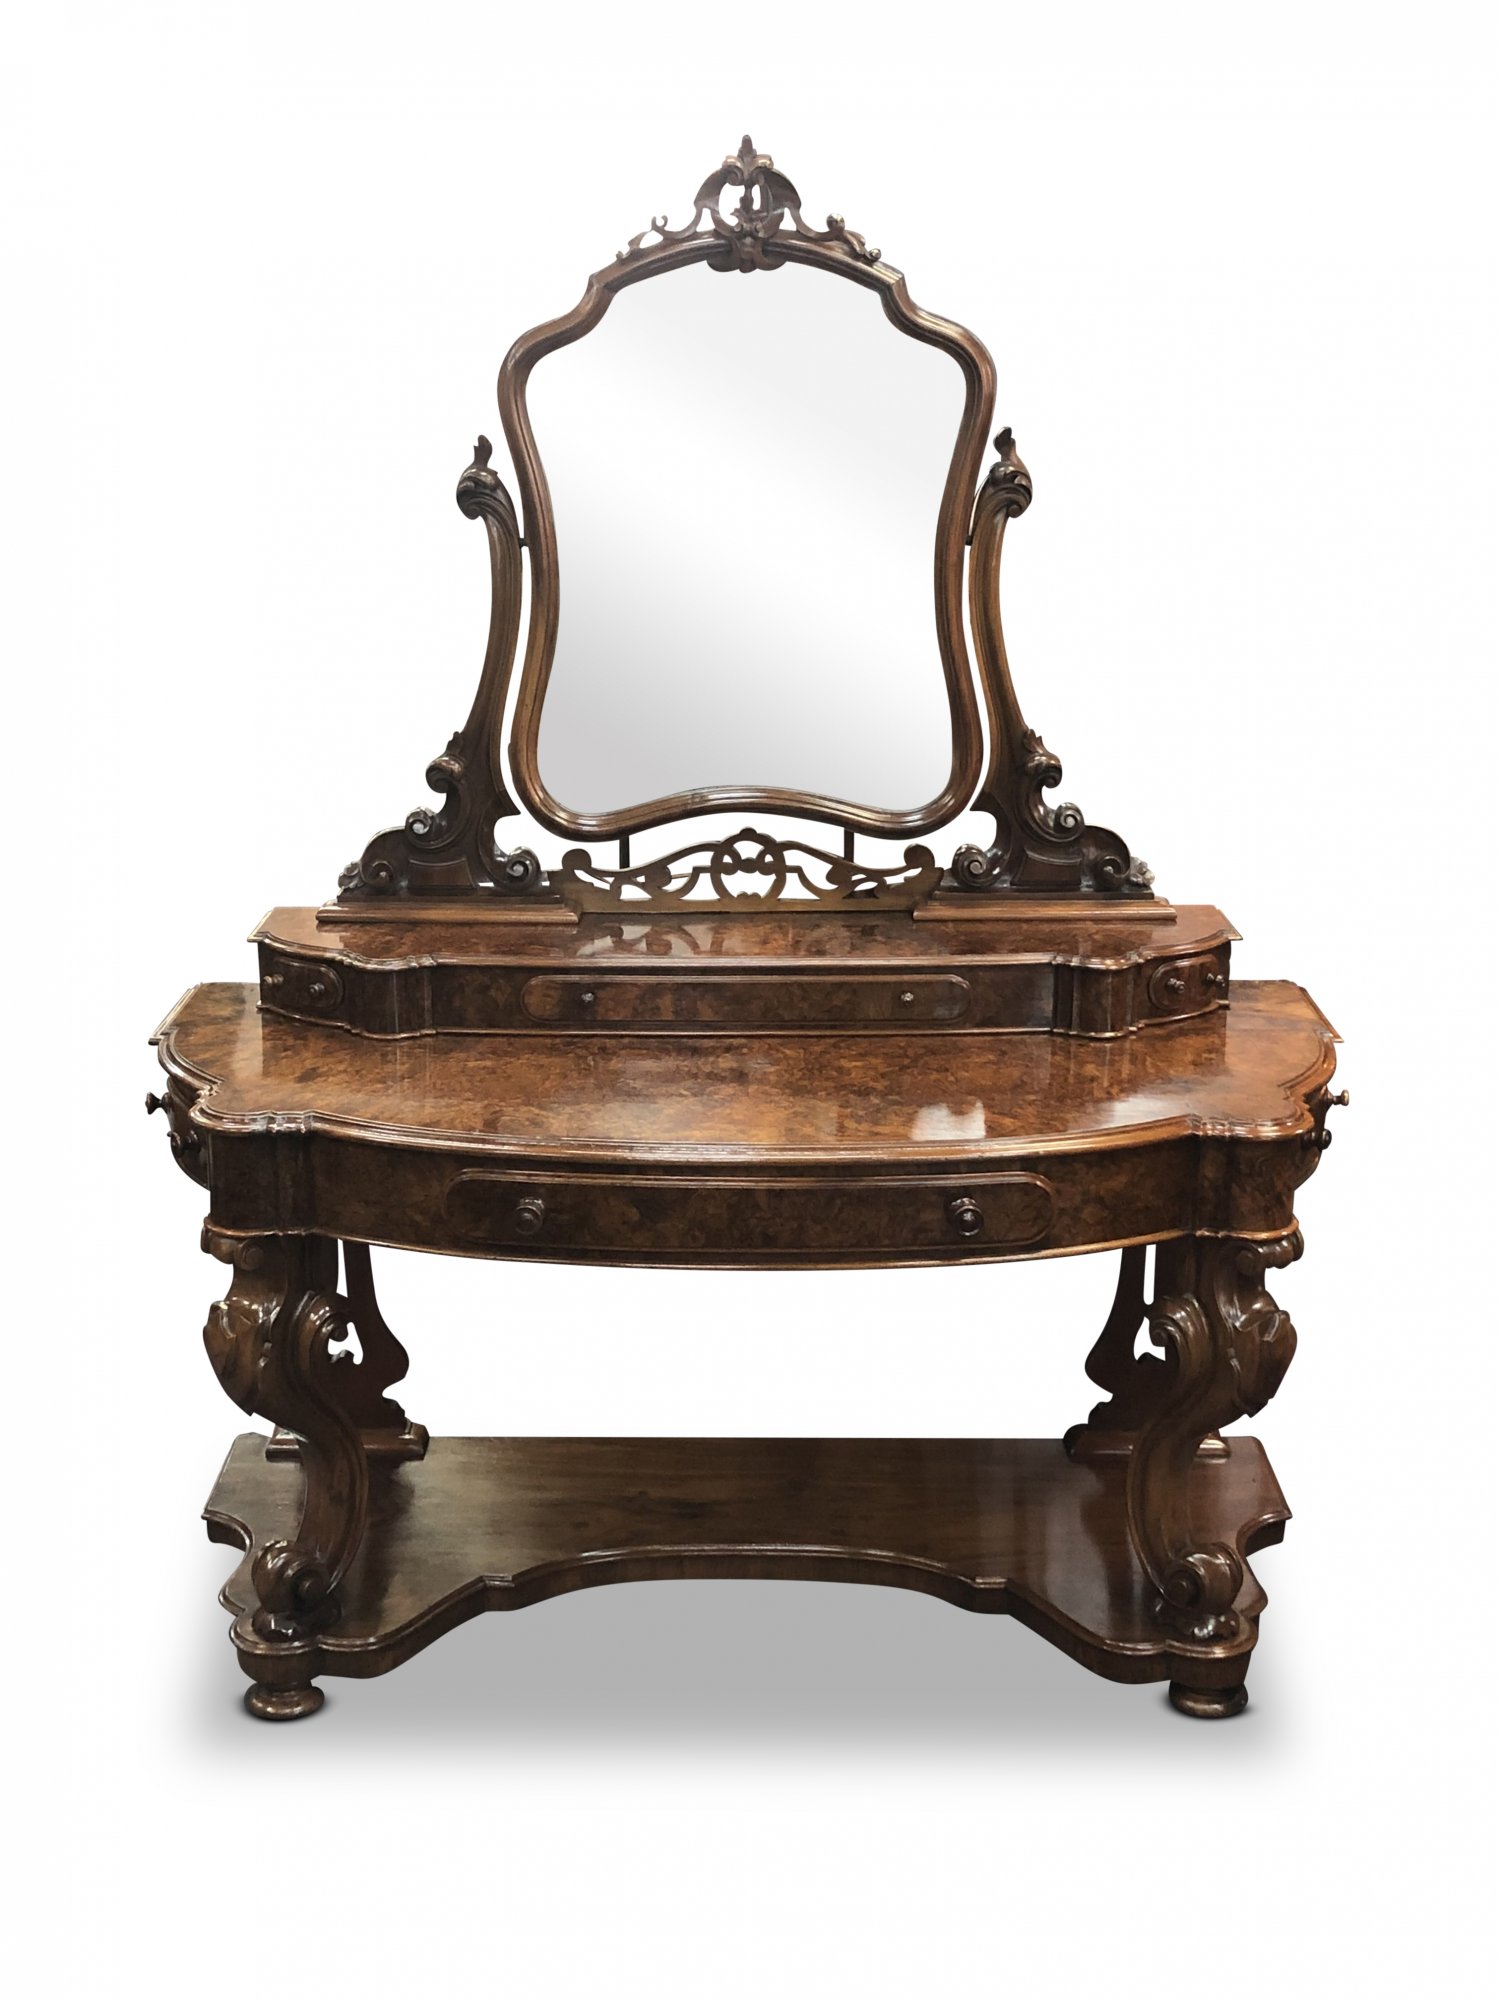 Victorian Burr Walnut Bow-Fronted Dressing Table